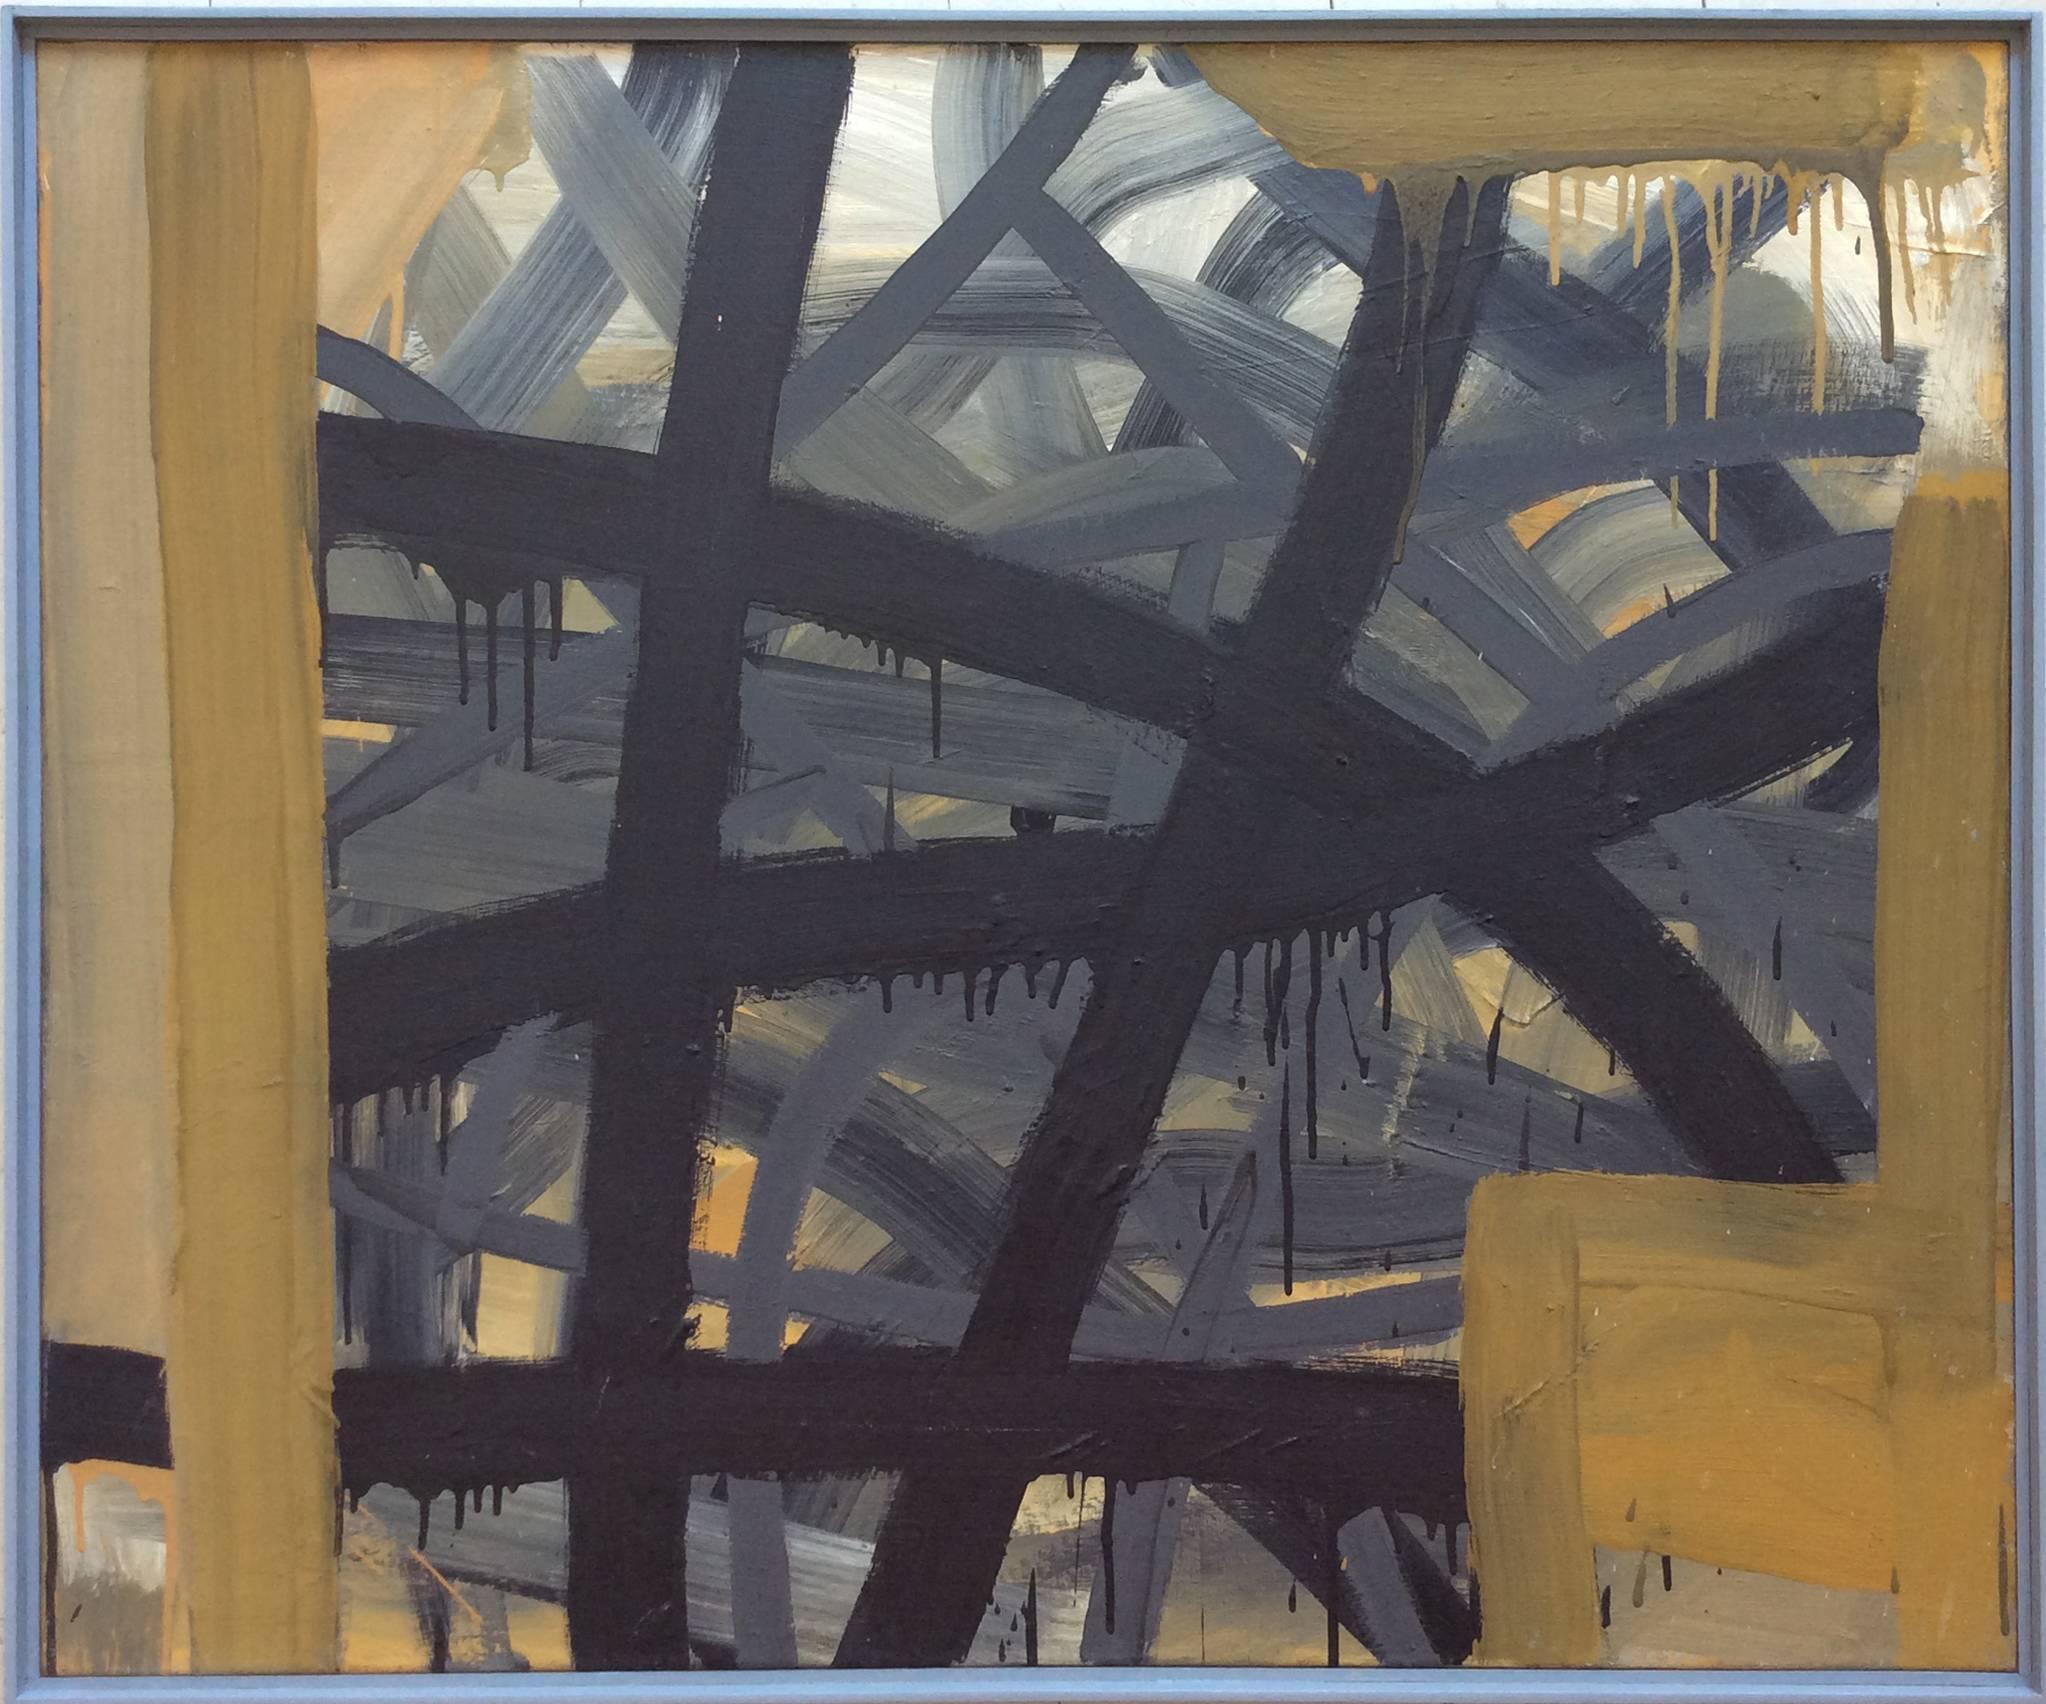 Christopher Engel Abstract Painting - Criss Cross (Abstract Expressionist Oil Painting in Sienna Yellow, Grey, Black)